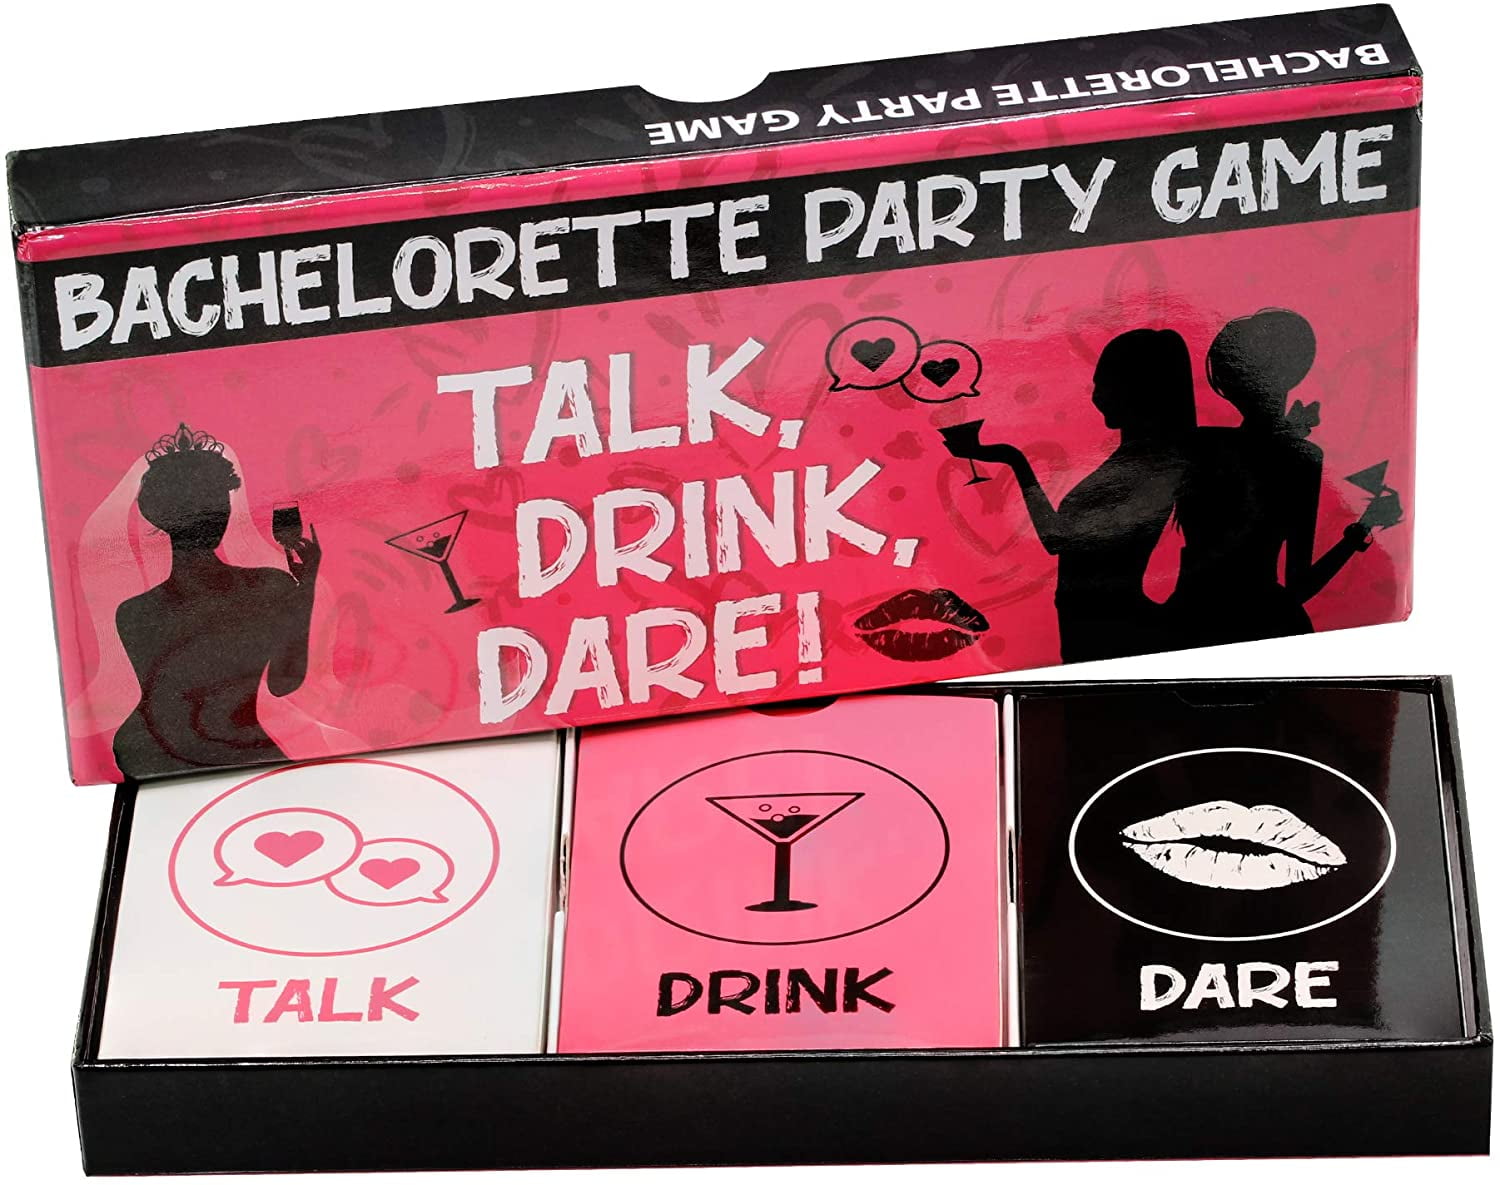 Bachelorette Party Games | 3-in-1 Game to Celebrate the Bride to Be ...